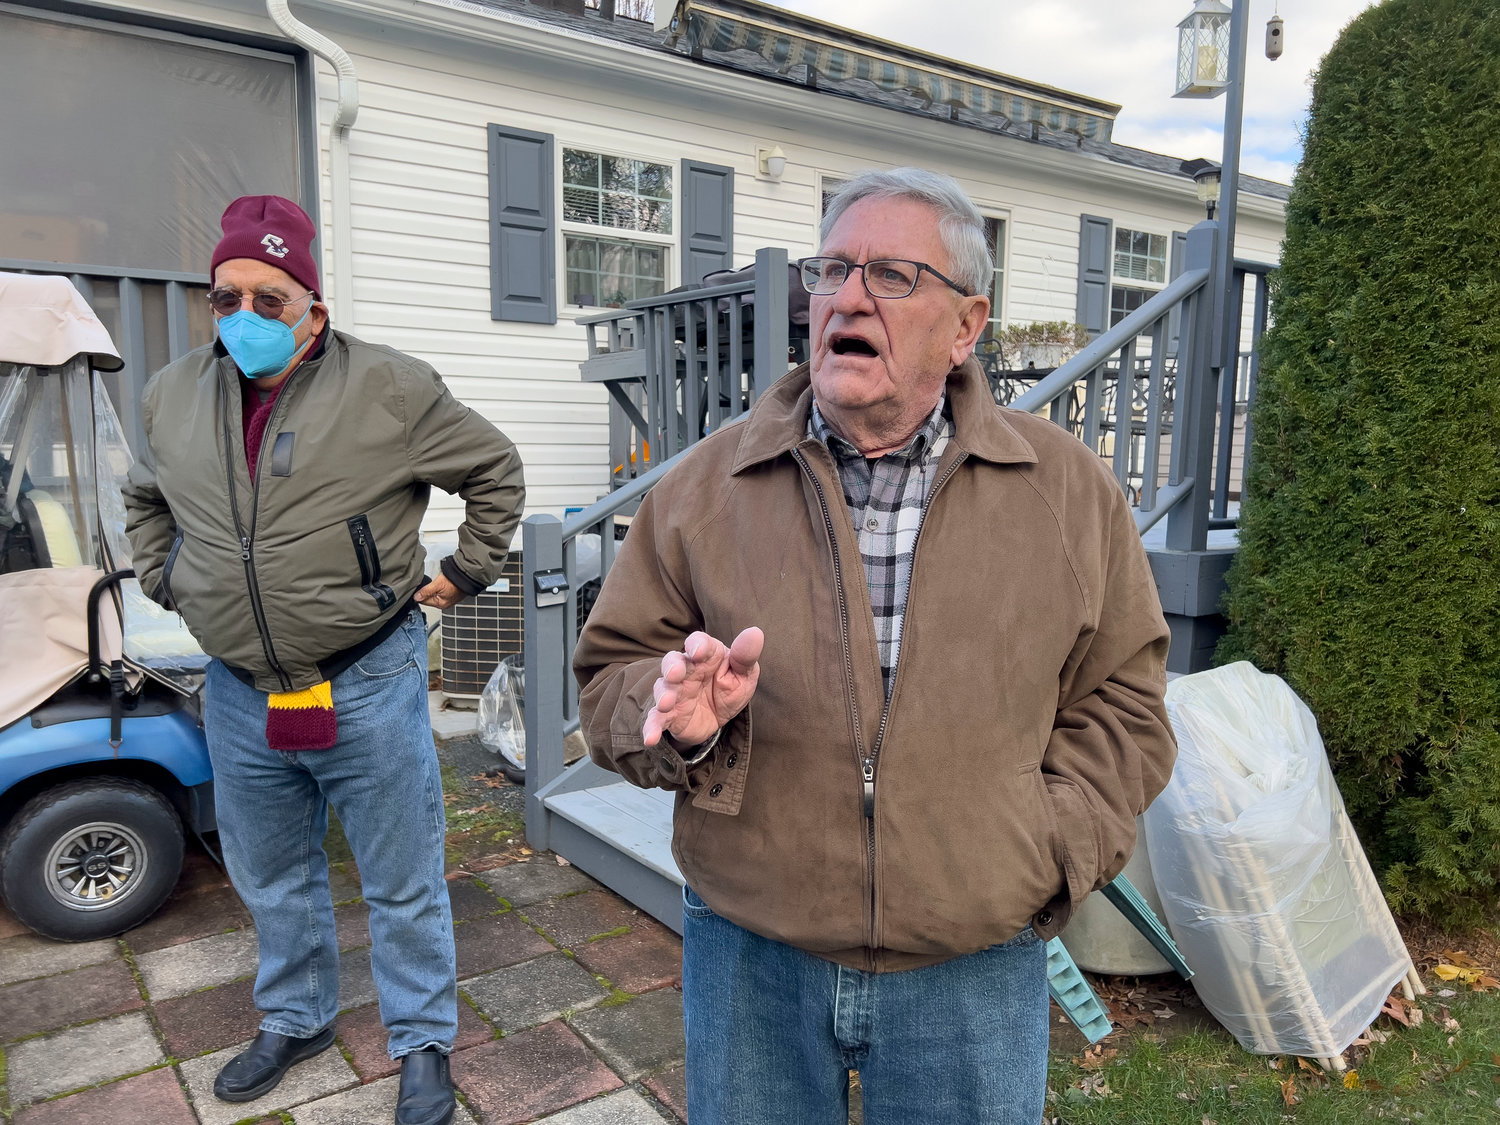 Al Alfonso (left) looks on as Don Knight speaks about a tree that needs removing before it lands on his house. 